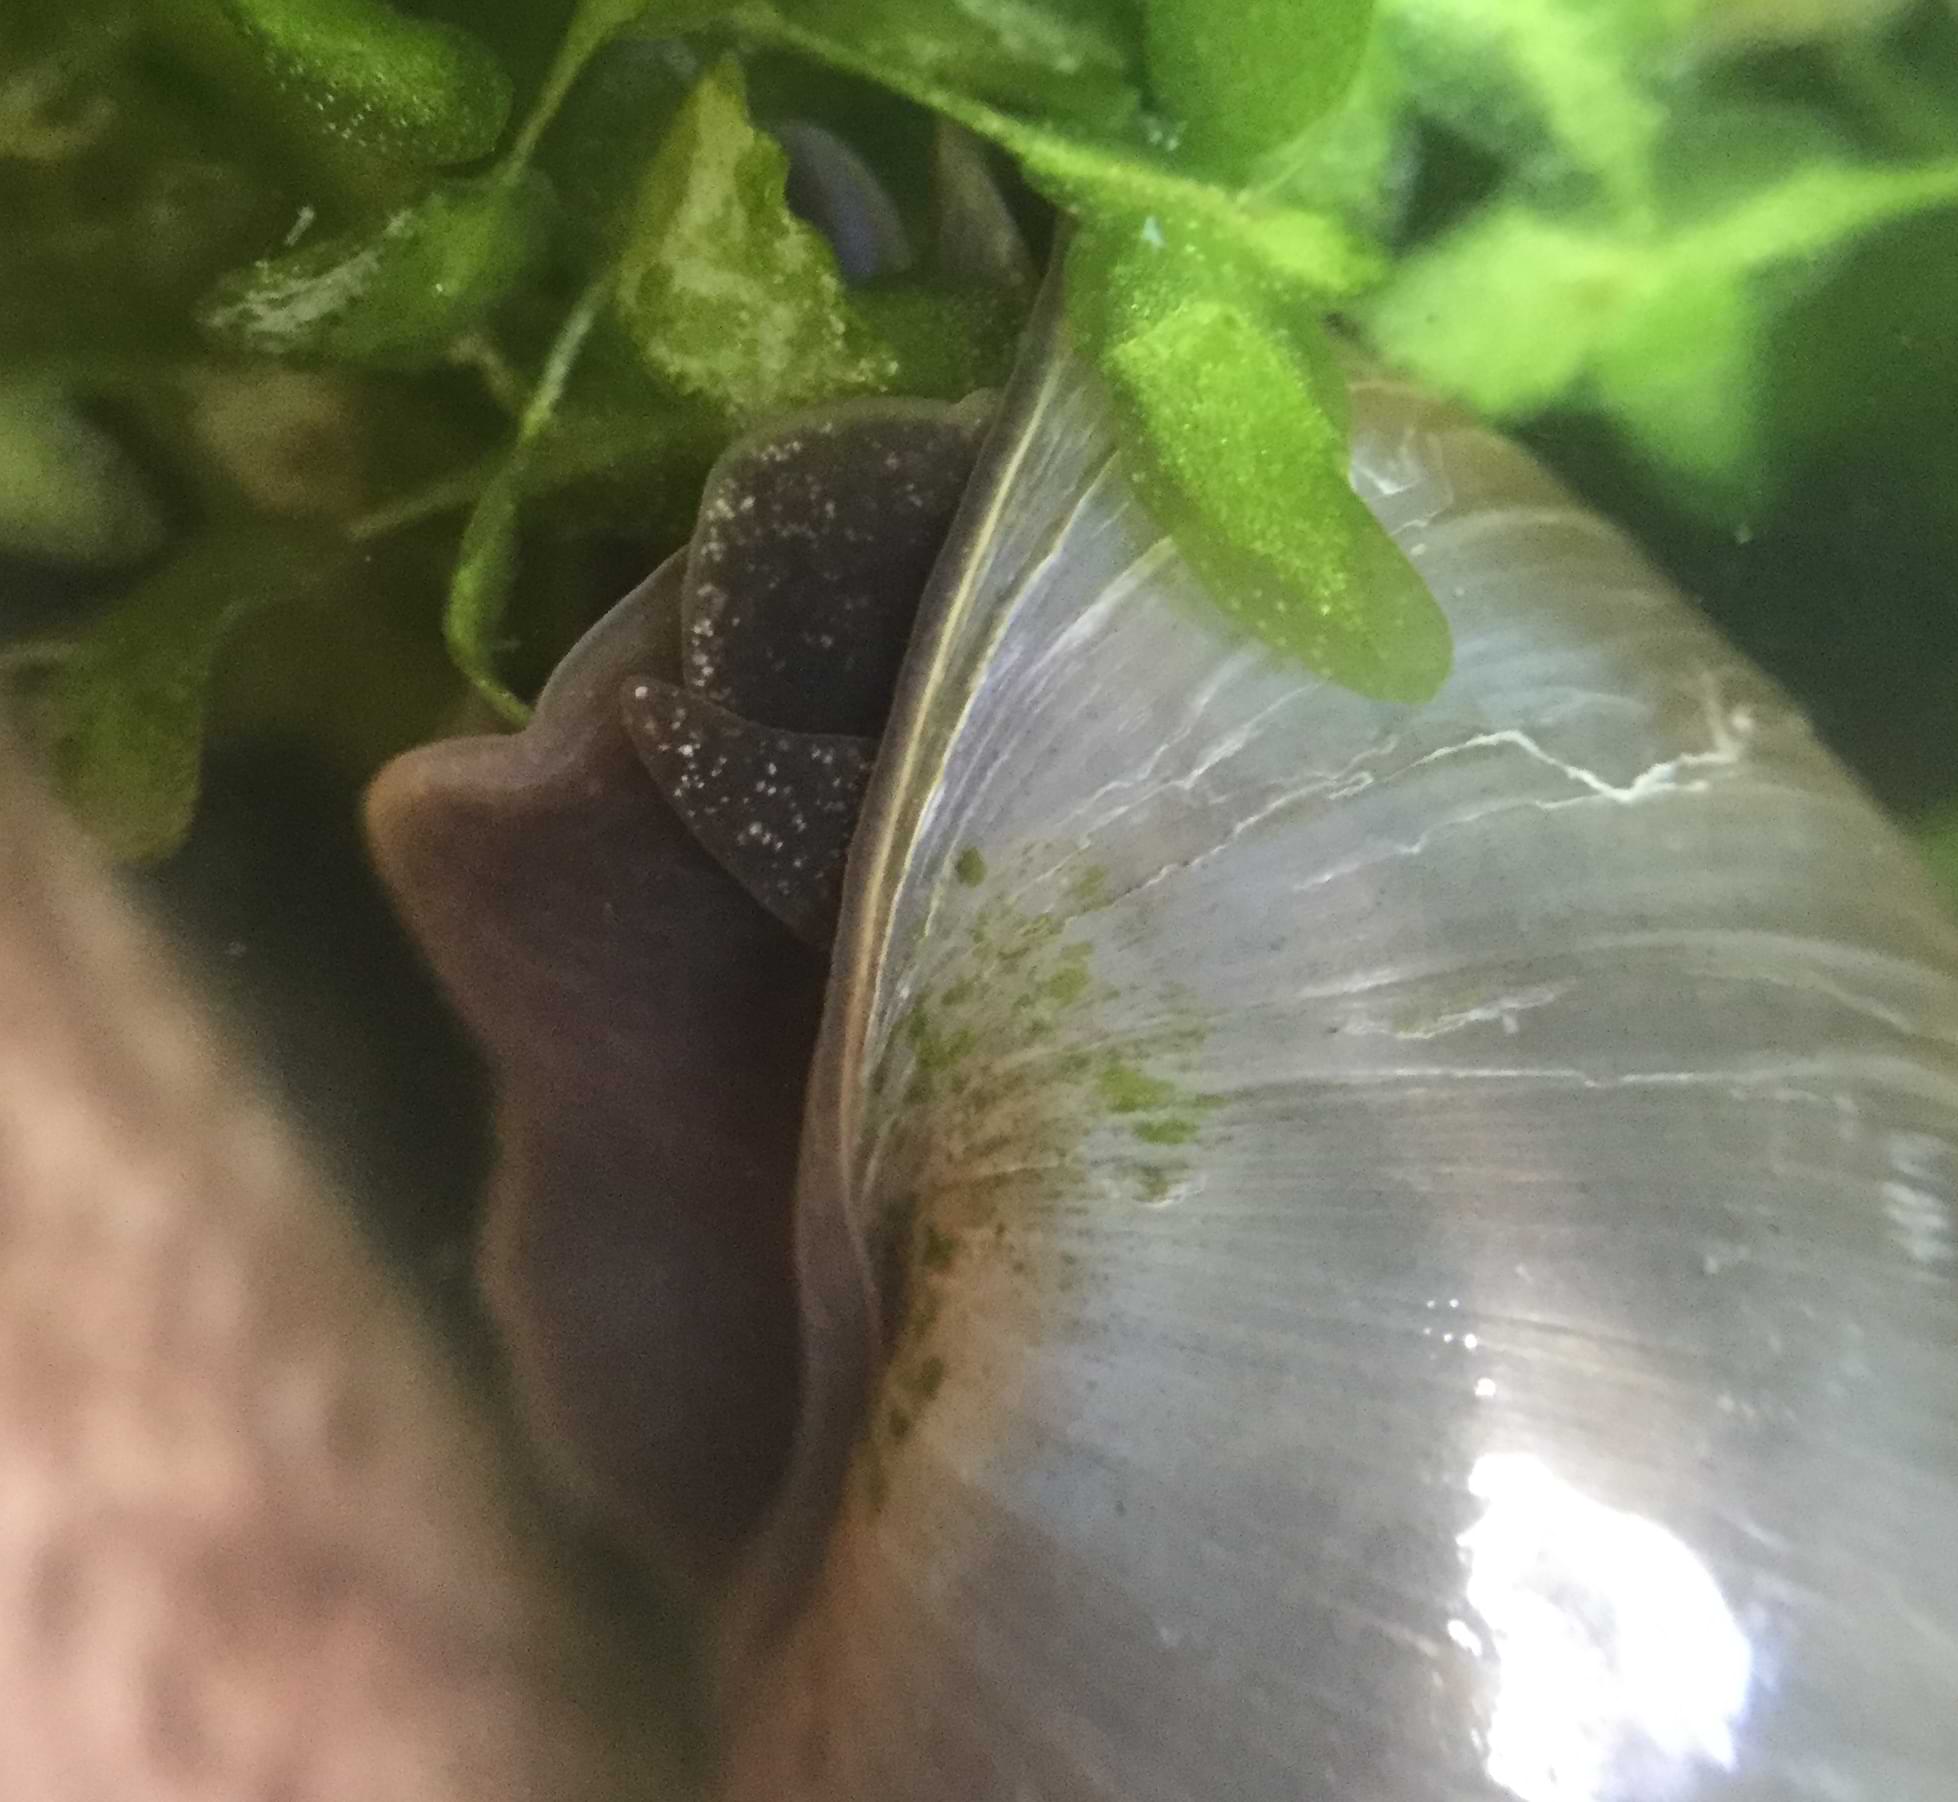 Close up of the same snail's body. It is mostly dark but with some bright speckles covering it.